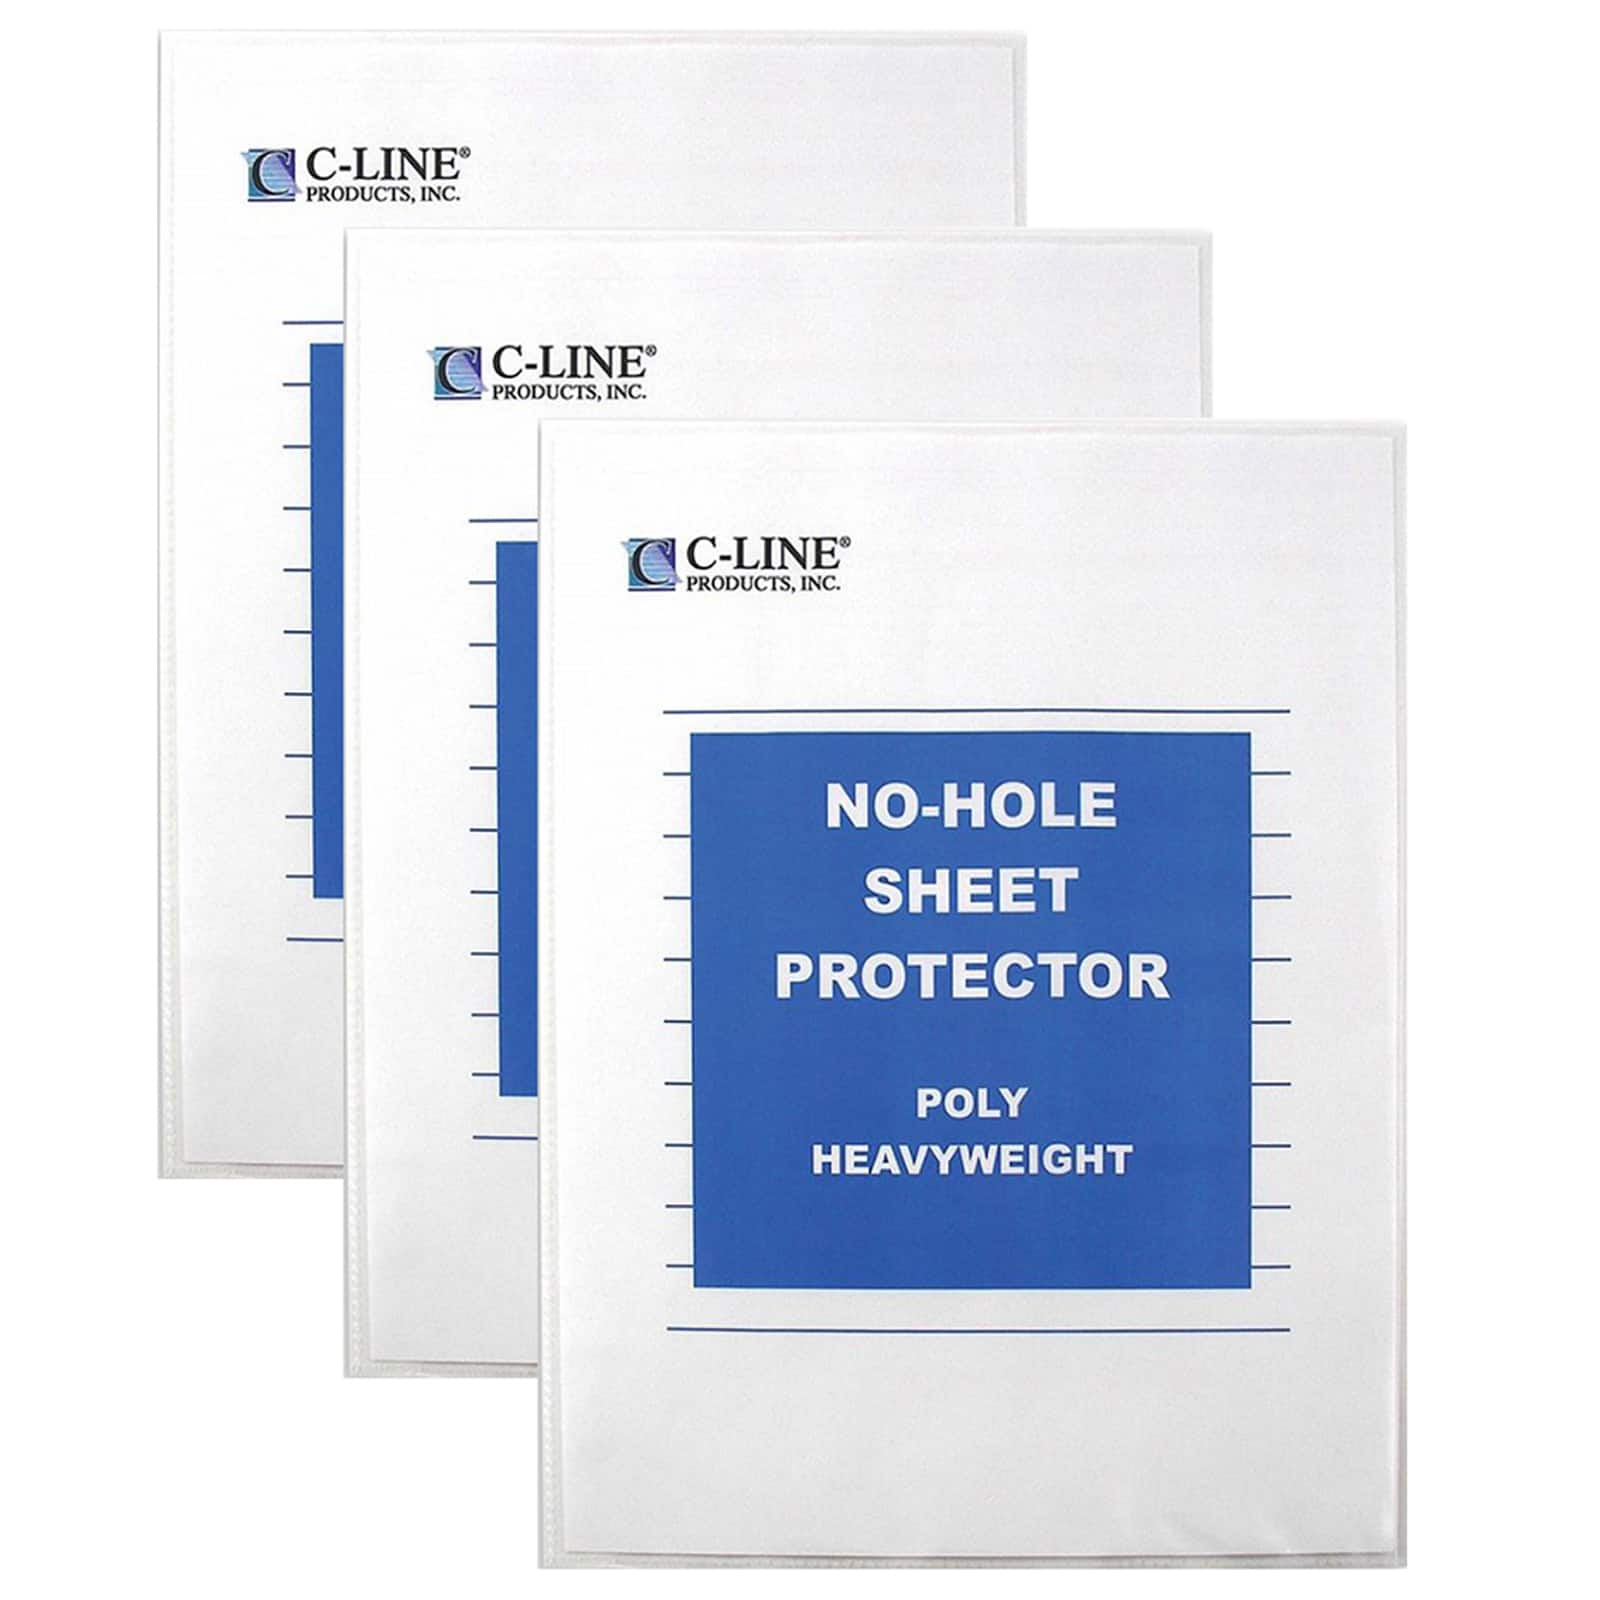 C-line Products 10 Sheet Protector for sale online 